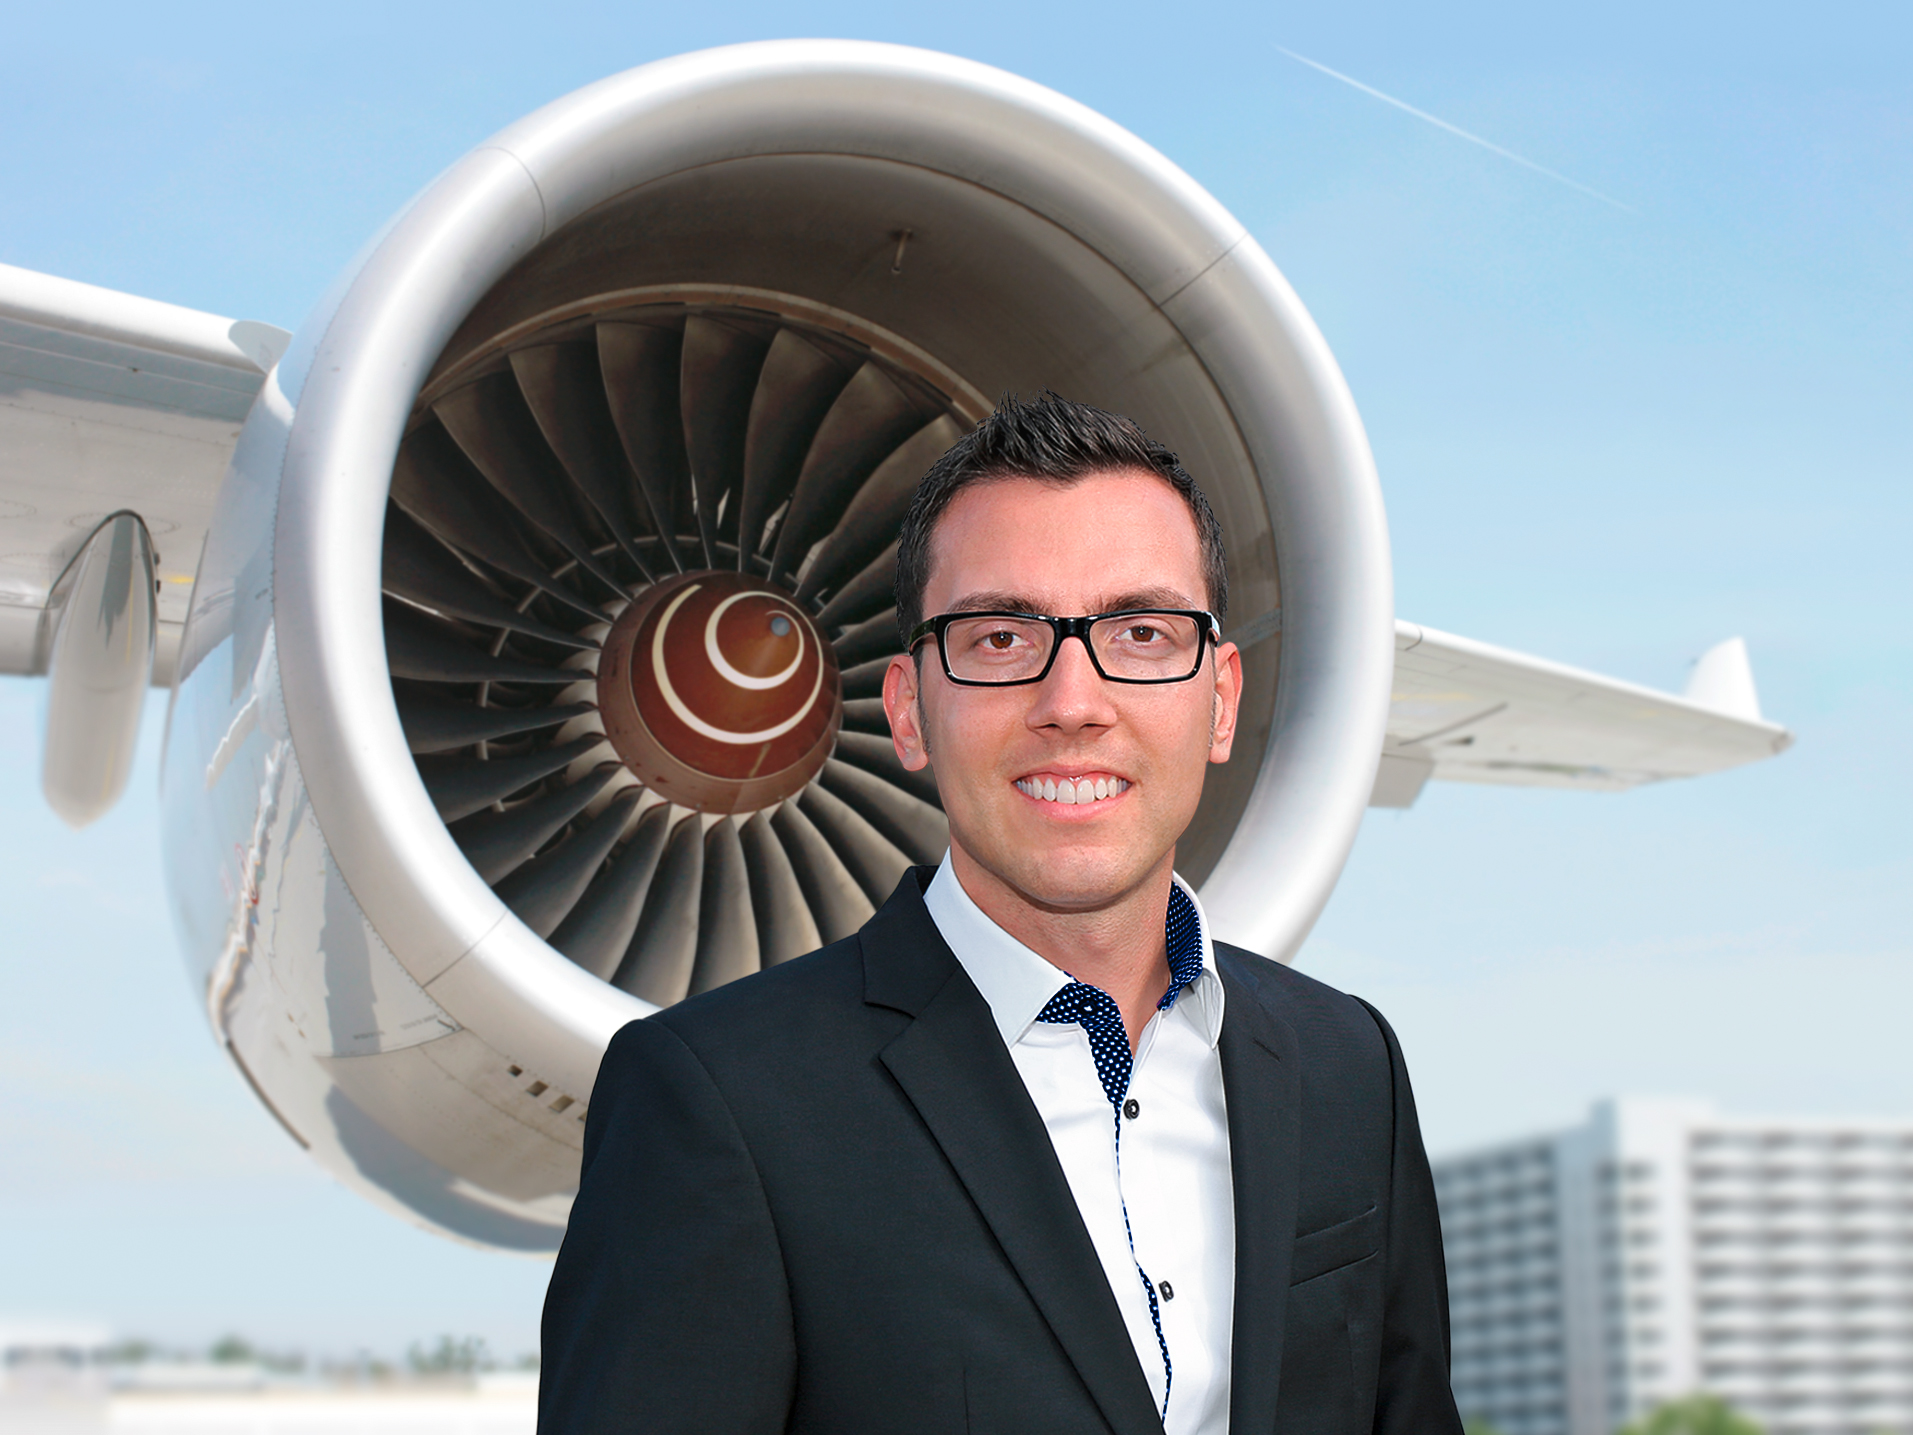 Thomas Bornschein, Manager of Online and Ancillary Sales at SunExpress